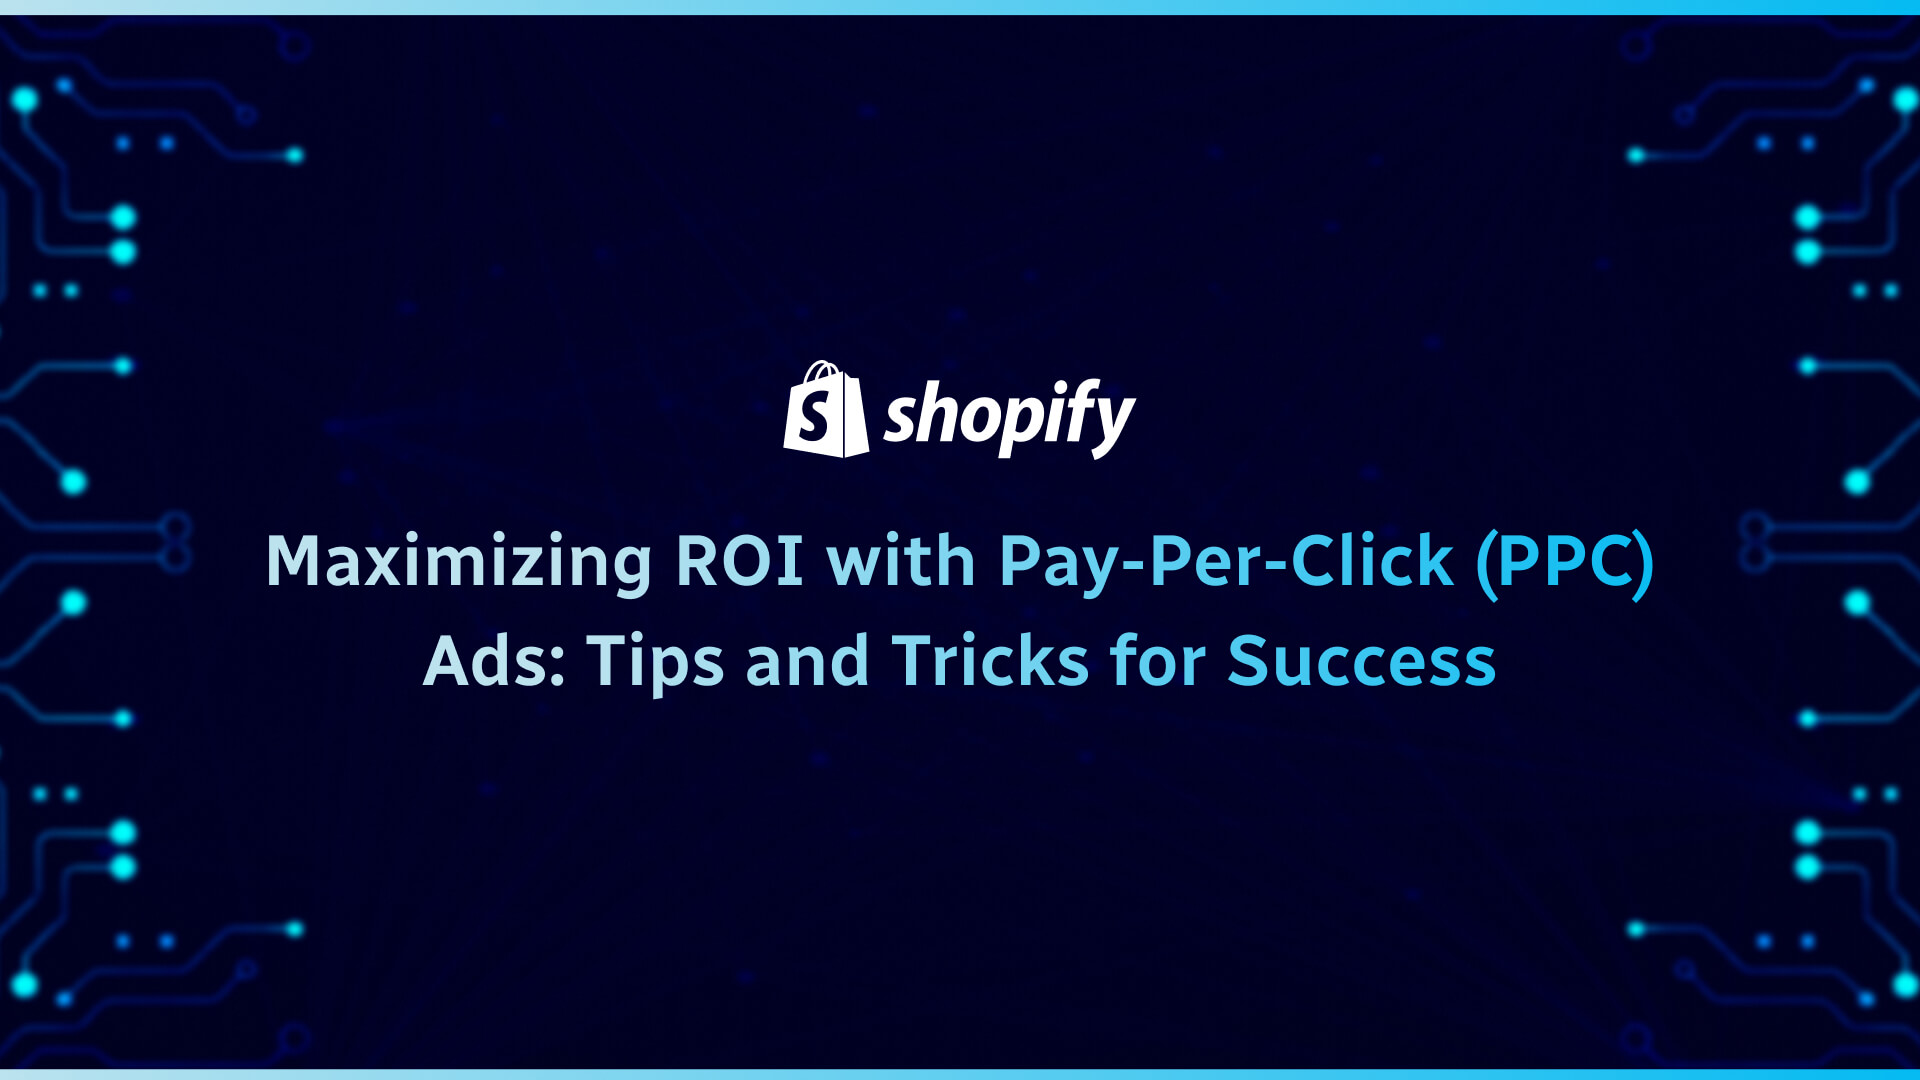 Maximizing ROI with Pay-Per-Click (PPC) Ads: Tips and Tricks for Success